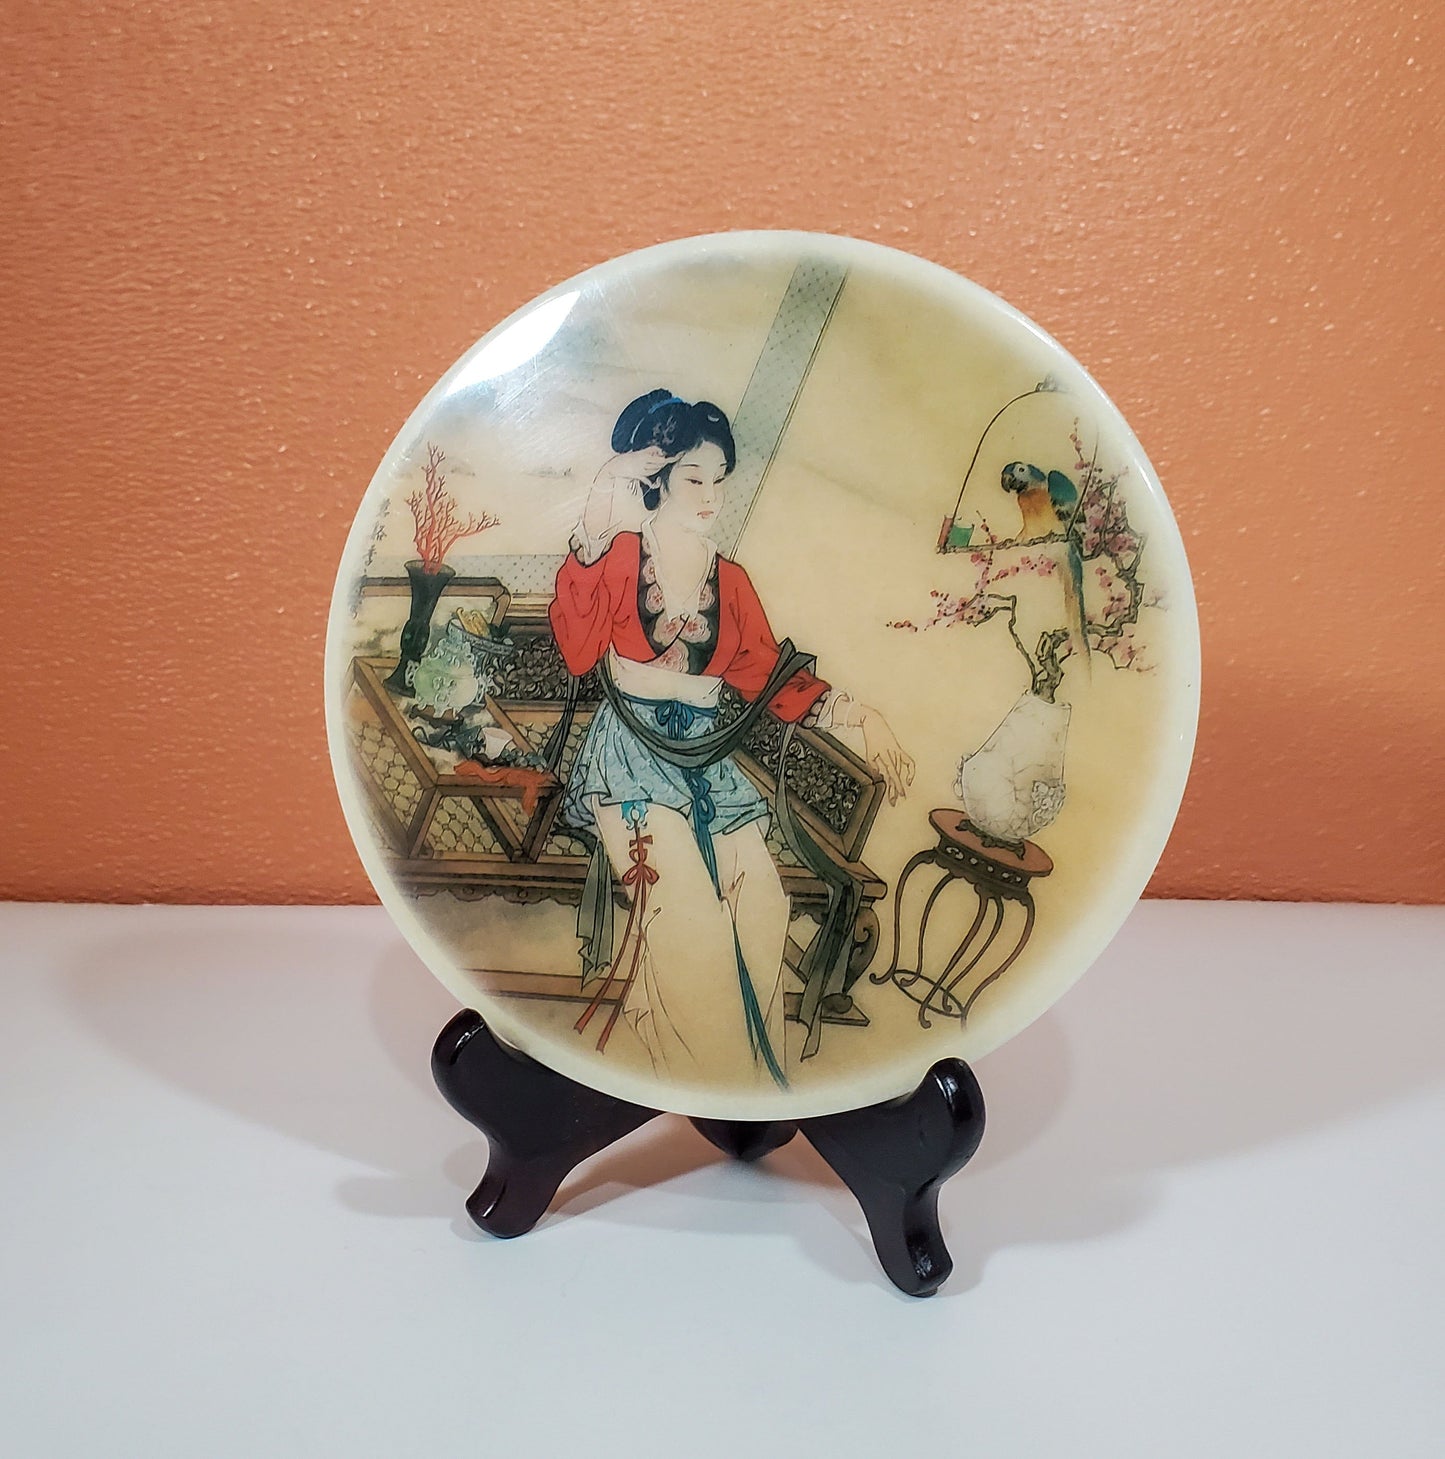 Vintage Hand-Painted Geisha Stone Plate with Wooden Stand | Home Decor Plate 8”